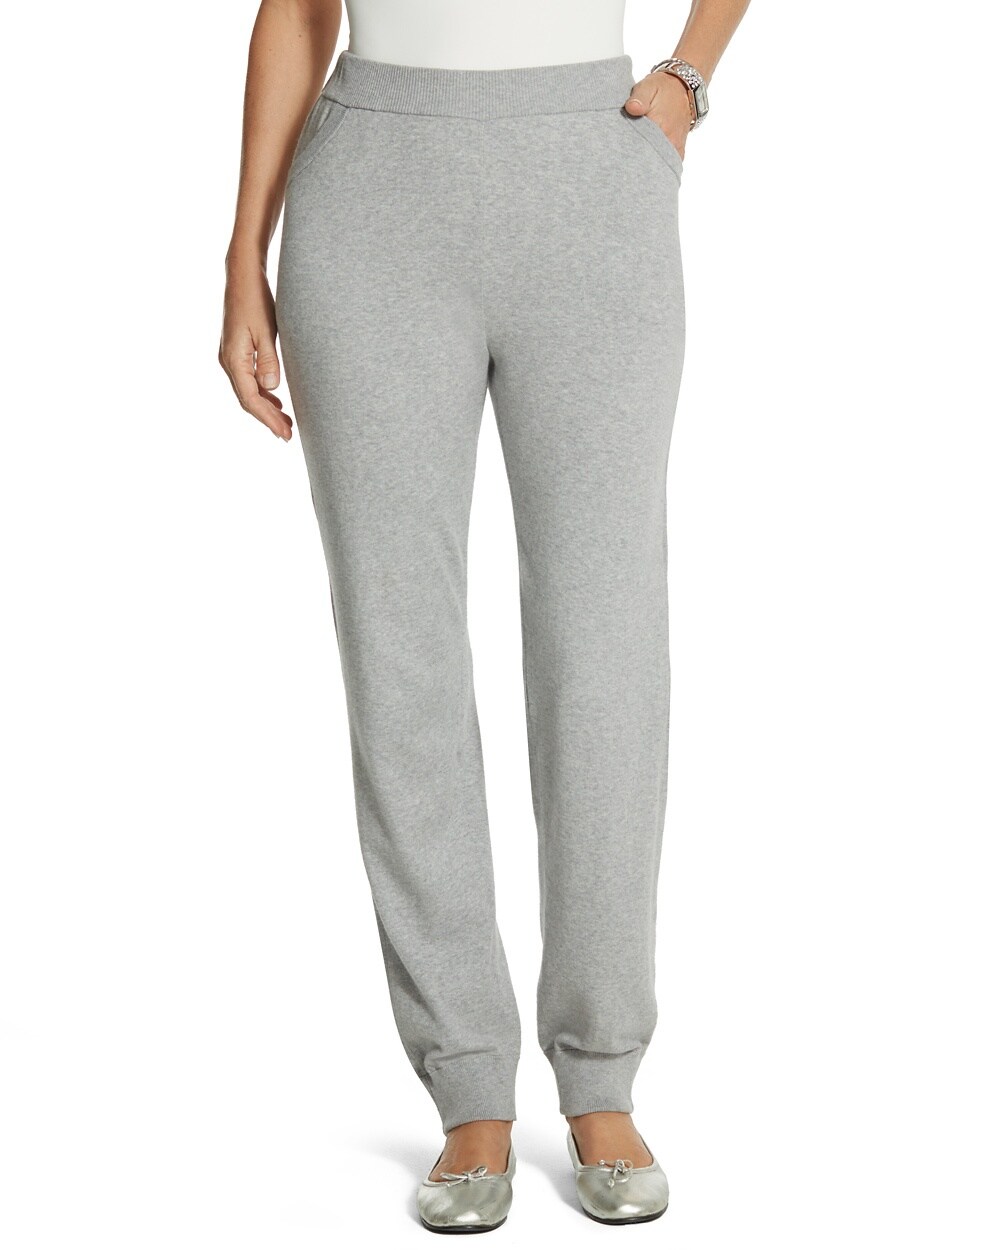 Zenergy Luxe Ankle Sweater Pants